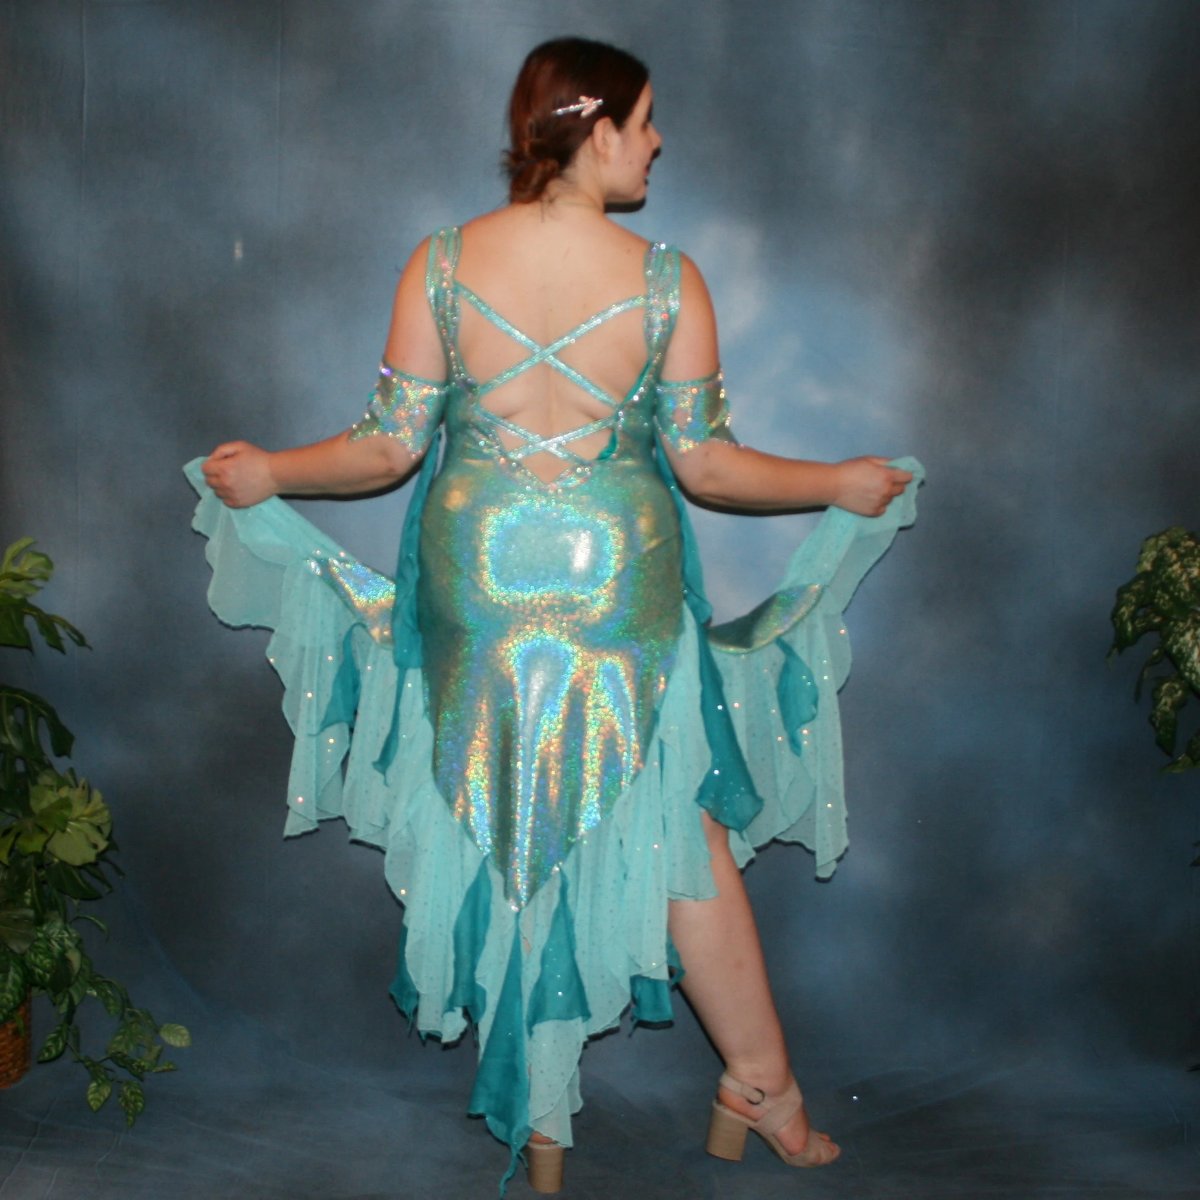 Crystal's Creations back view of Aqua Latin/rhythm dress created of gorgeous hologram base with flounces of aqua champagne sequin chiffon & teal glitter chiffon, embellished with CAB Swarovski stone work, with strap detailing on back. I envision this magical dress a gorgeous rumba, bolero or even a great solo dress for a waltz or foxtrot….or for an all around division.